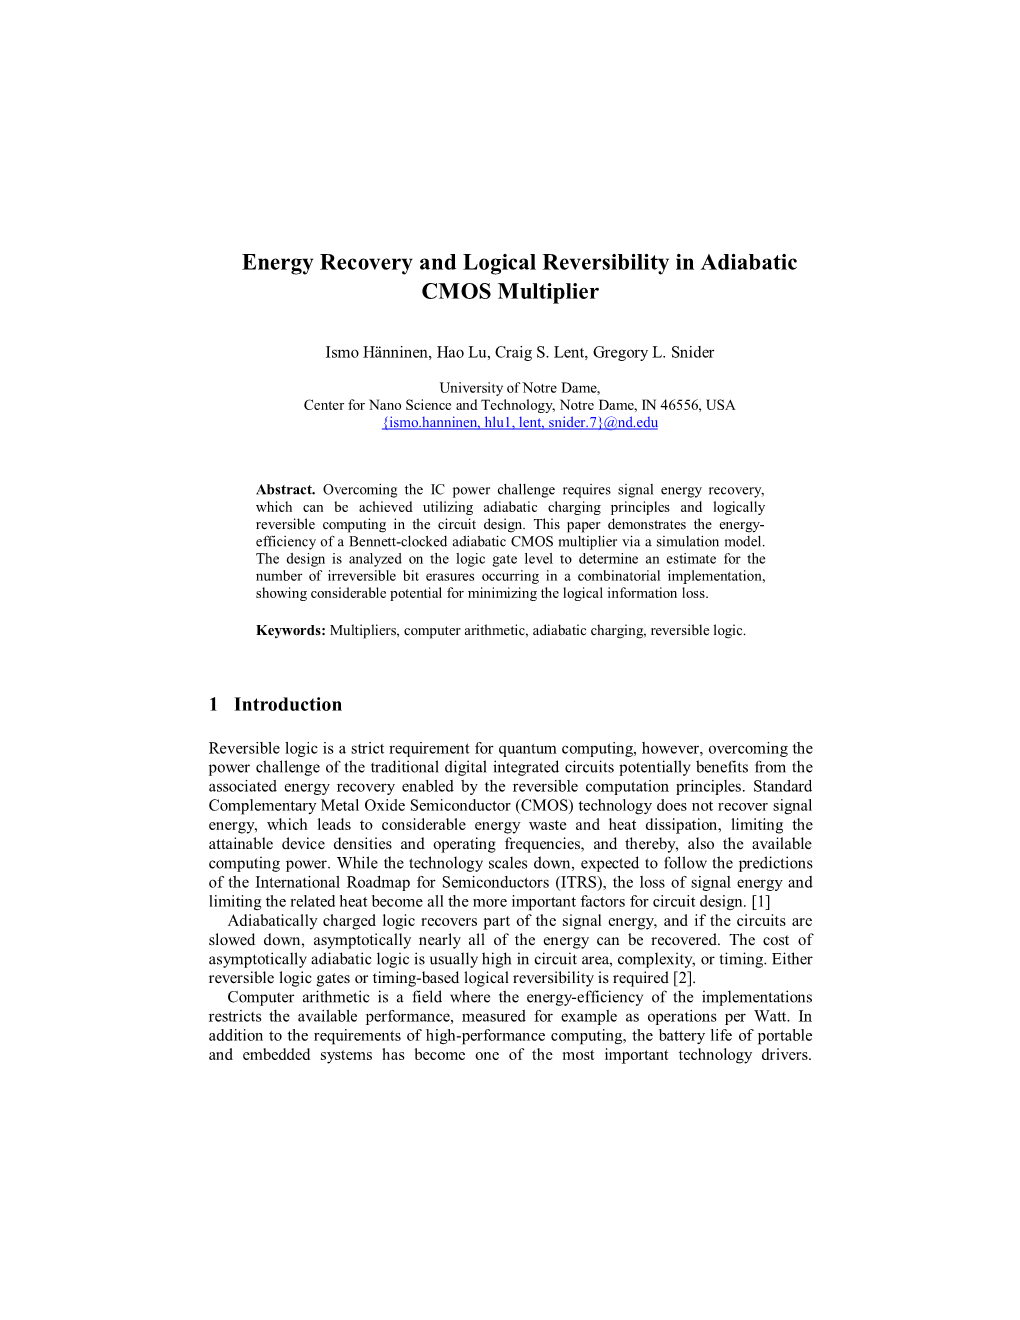 Energy Recovery and Logical Reversibility in Adiabatic CMOS Multiplier